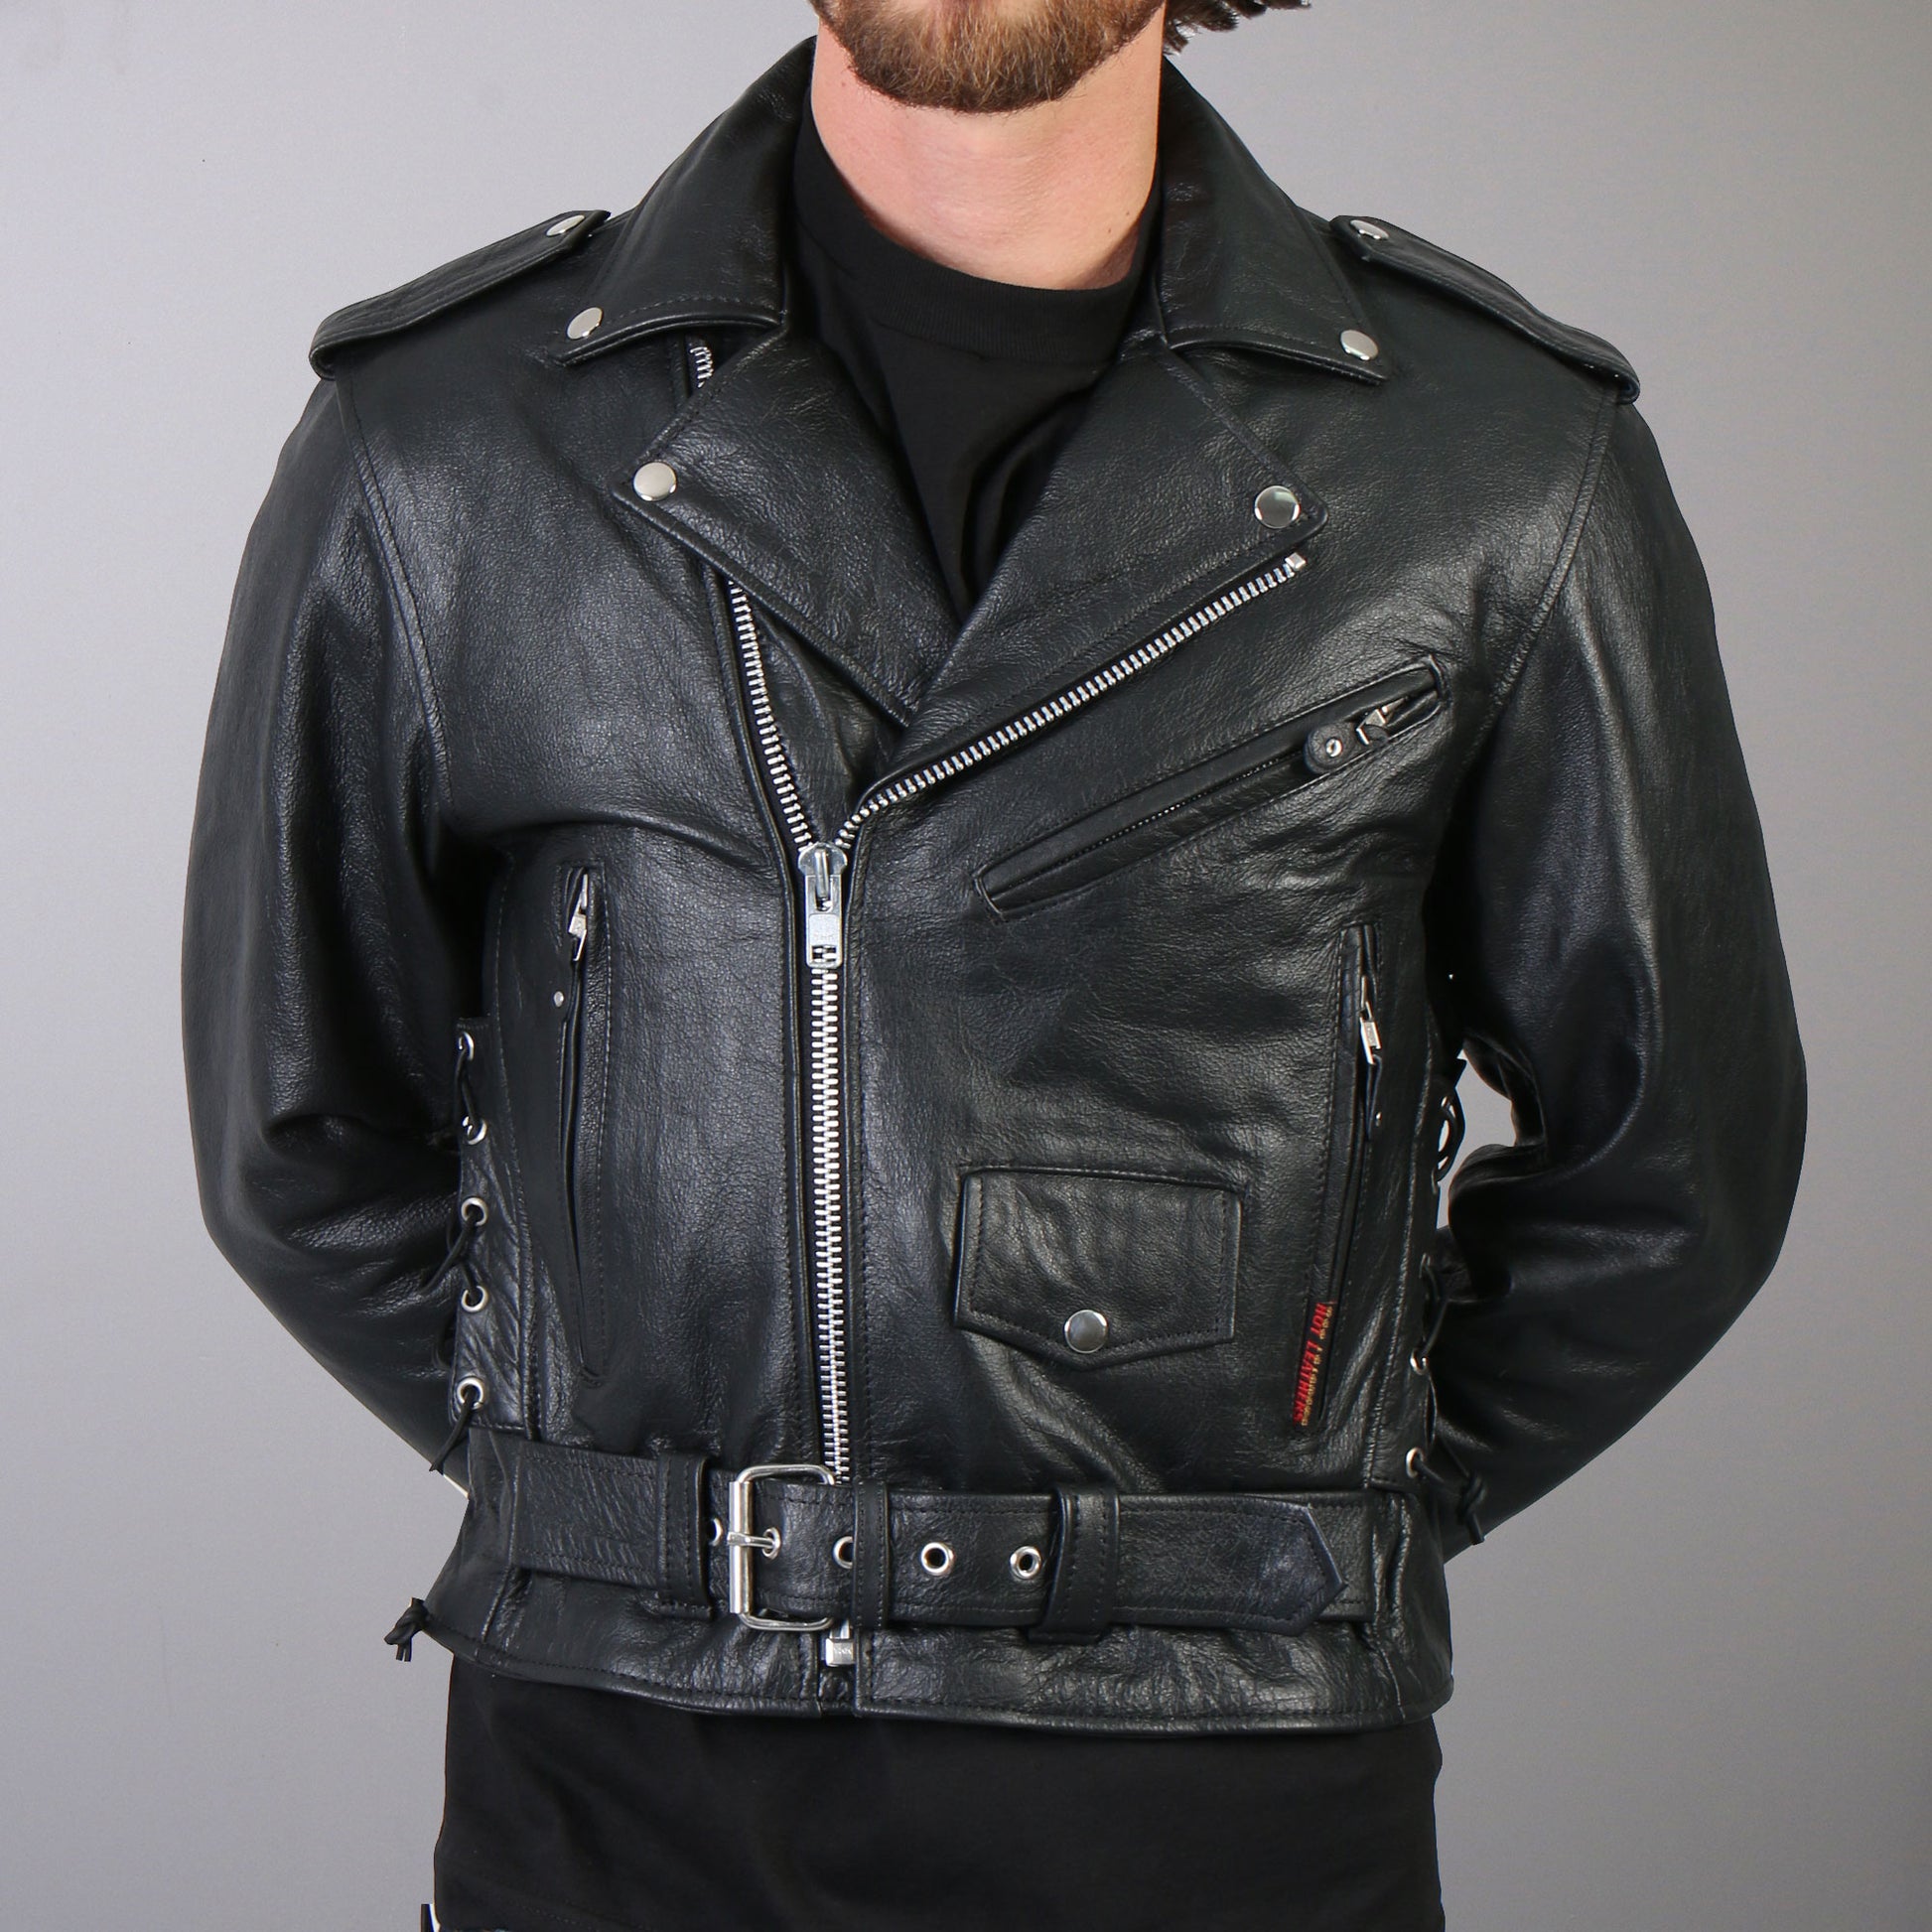 Hot Leathers JKM1002 Classic Men’s Motorcycle Leather Jacket with Zip Out Lining